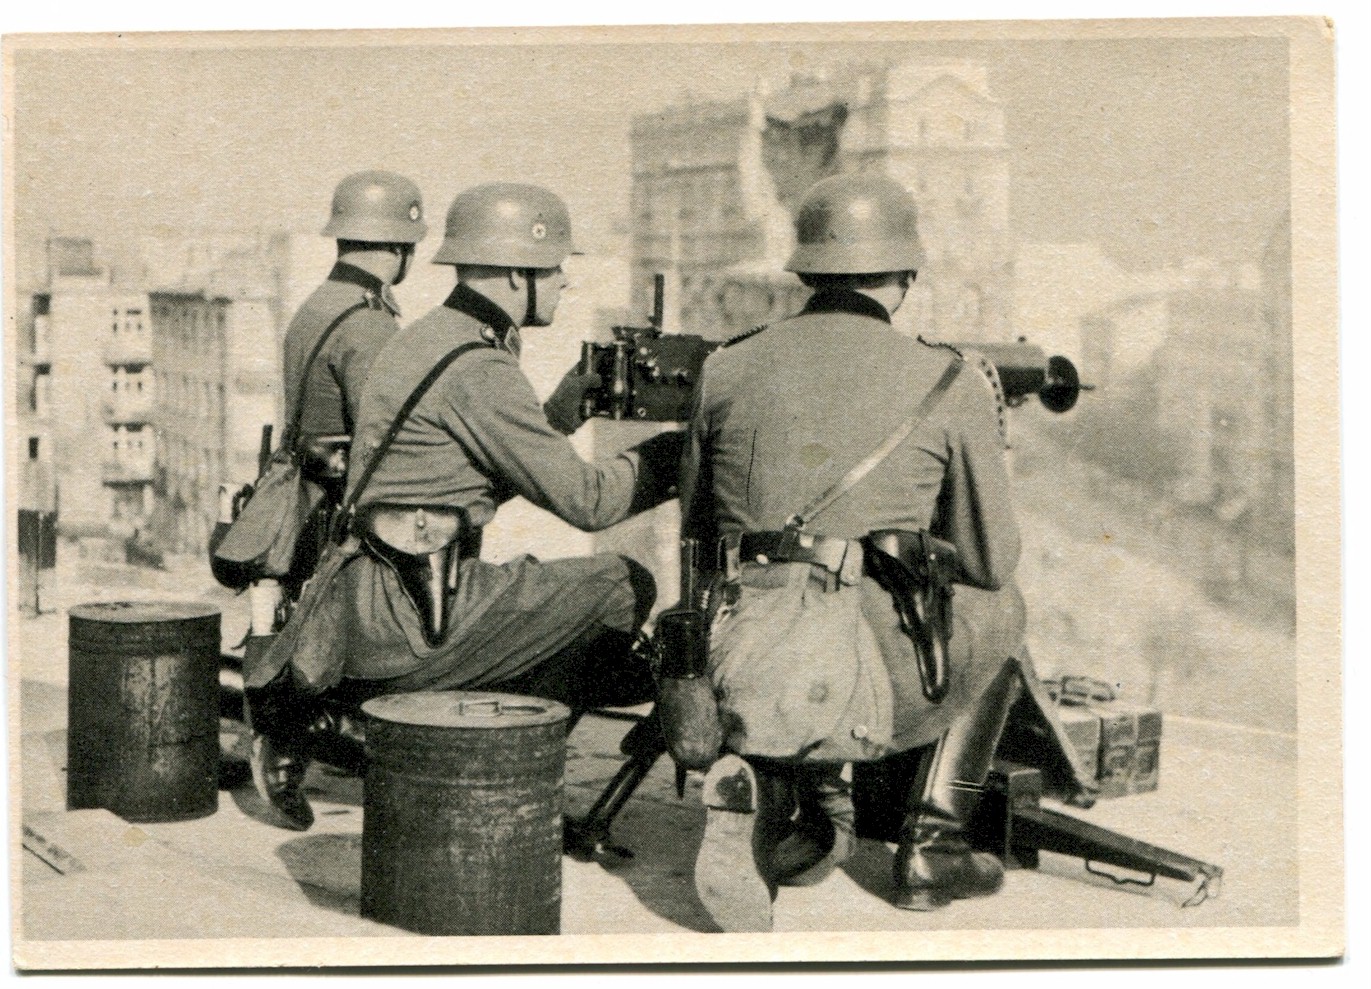 SS POST CARD POLICE IN POLAND"MACHINE GUN POST OF THE ORDER POLICE ON A ROOF IN WARSAW DURING THE ENTRANCE OF GERMAN TROOPS"